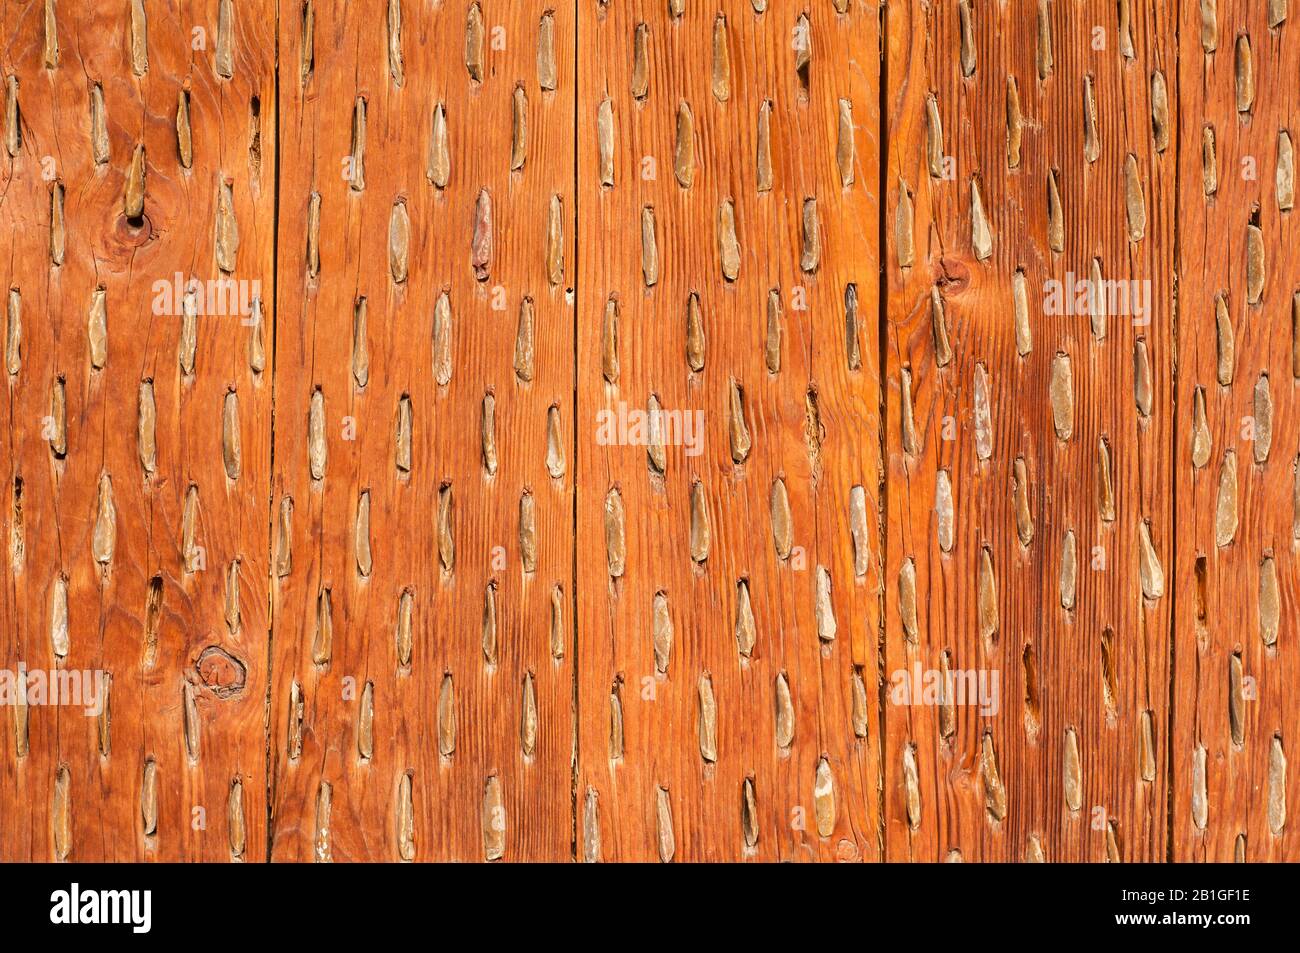 Bottom view of Spanish threshing board closeup as rural wooden background Stock Photo